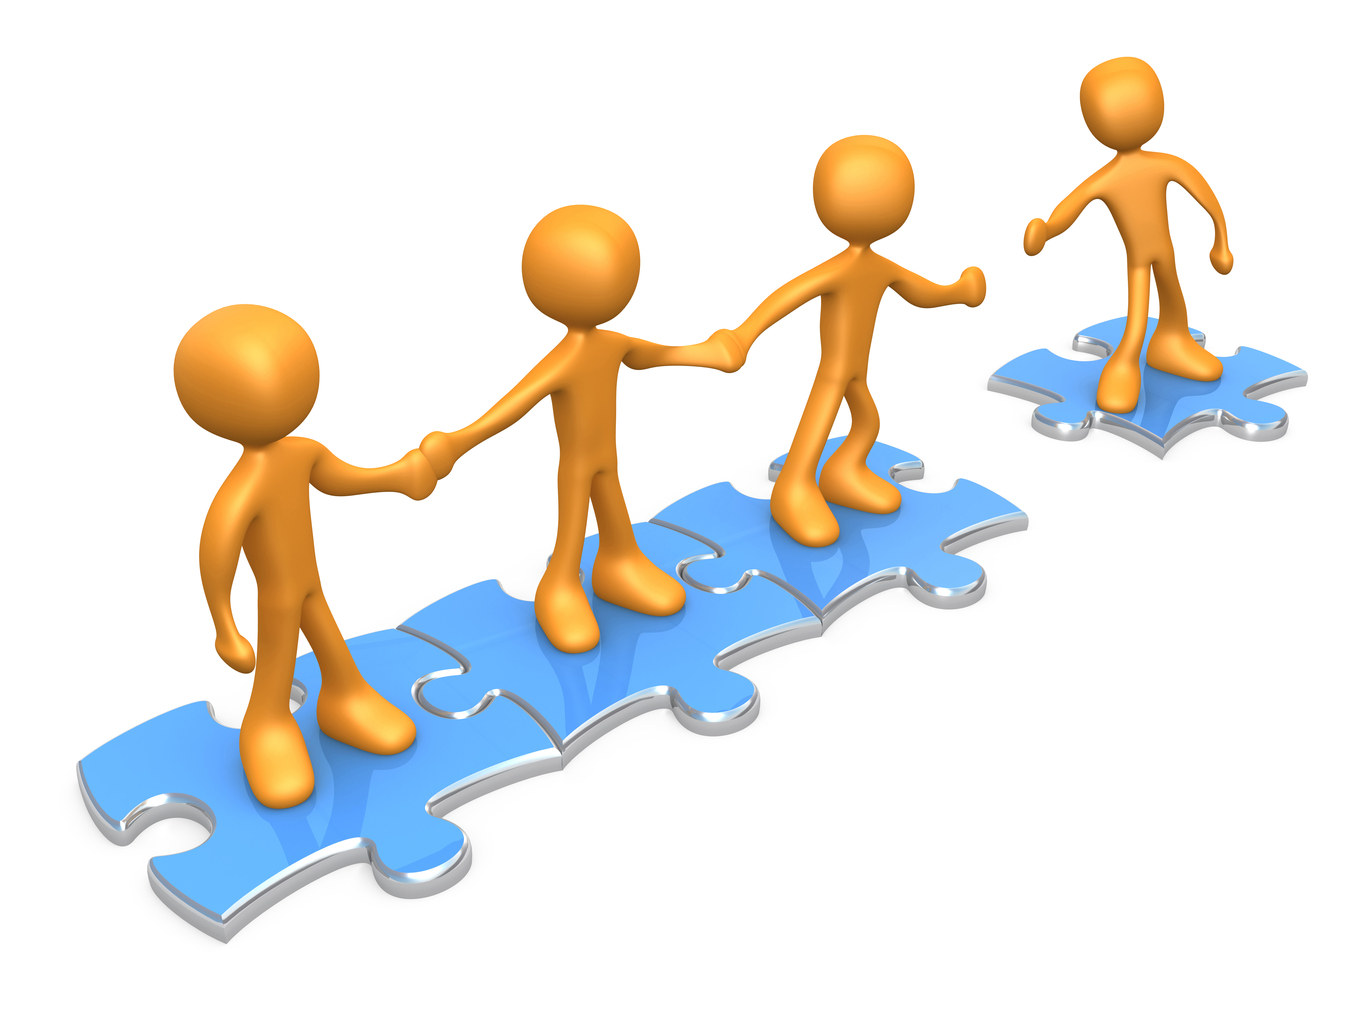 Team Of Three Orange People Holding Hands And Standing On Blue Puzzle Pieces, With One Man Reaching Out To Connect Another To Their Group Clipart Illustration Graphic